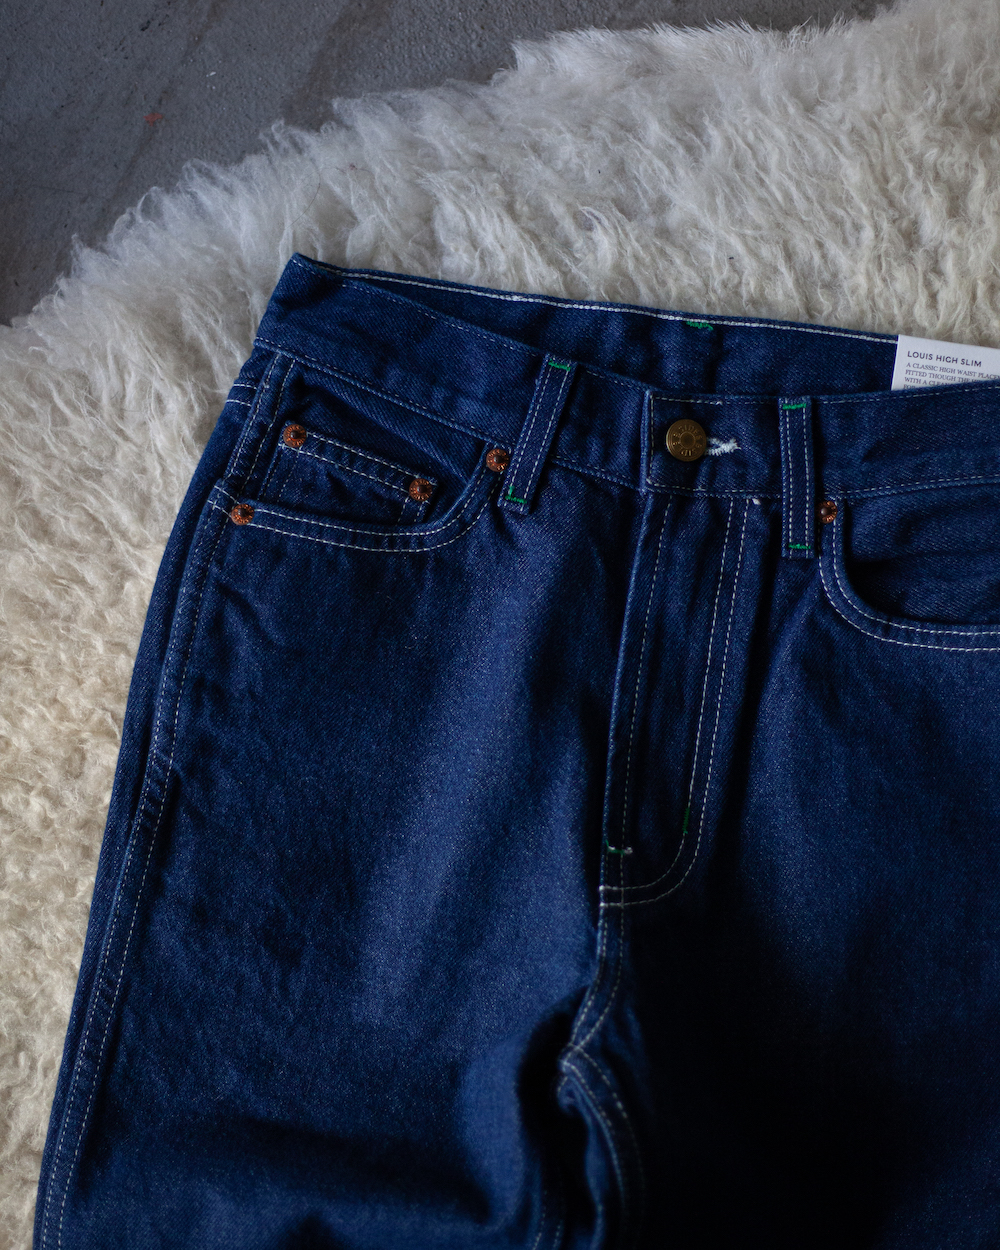 B SIDES JEANS from NY | MAIDENS SHOP WOMEN